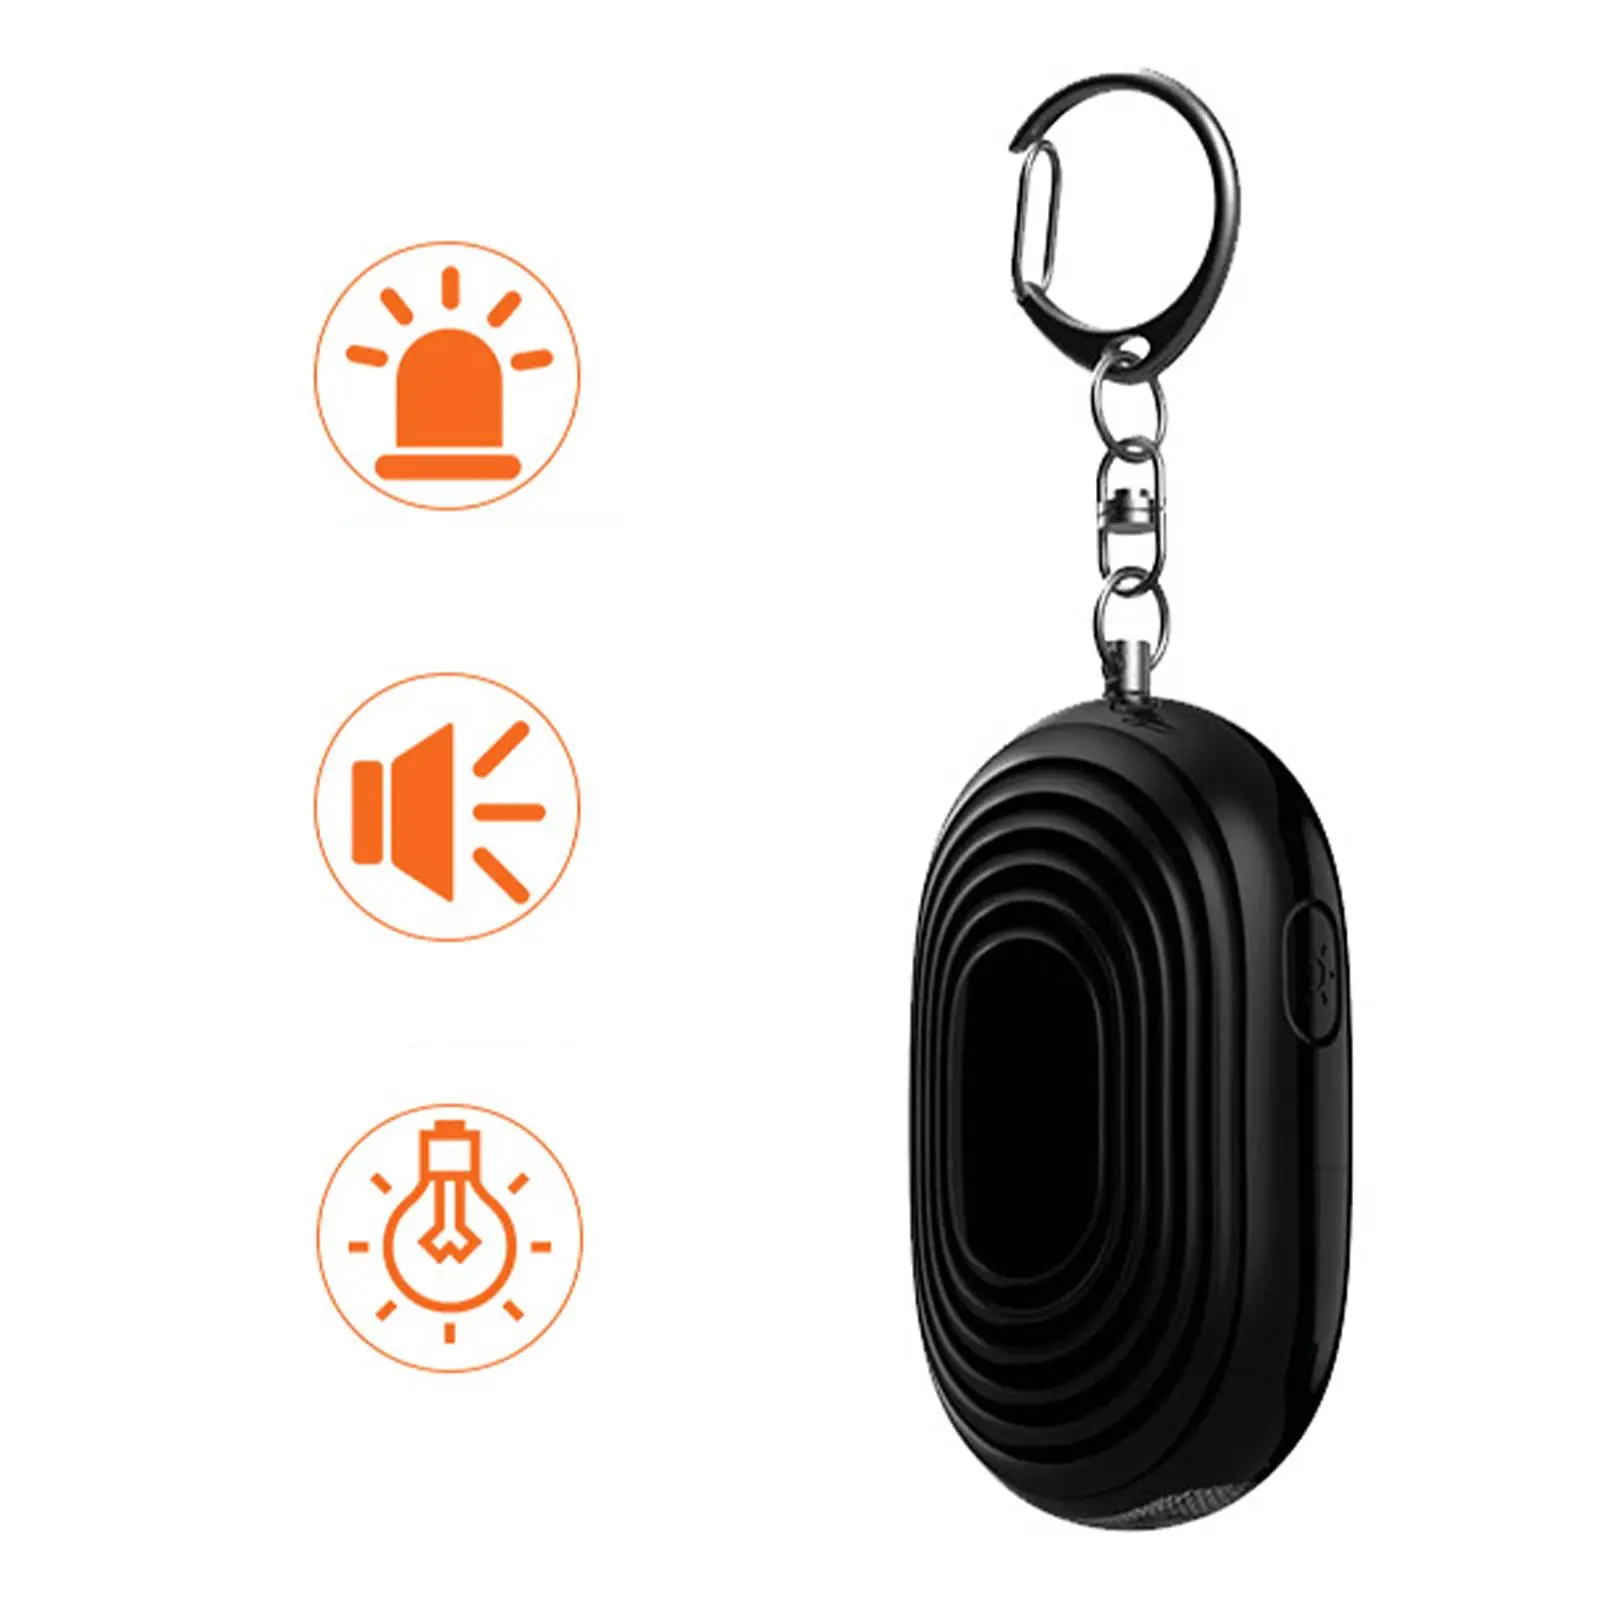 Safe Personal Alarm Loud with LED Night Light Emergency Safety Alarm Keychain for Elderly Women Children Camping Night Running